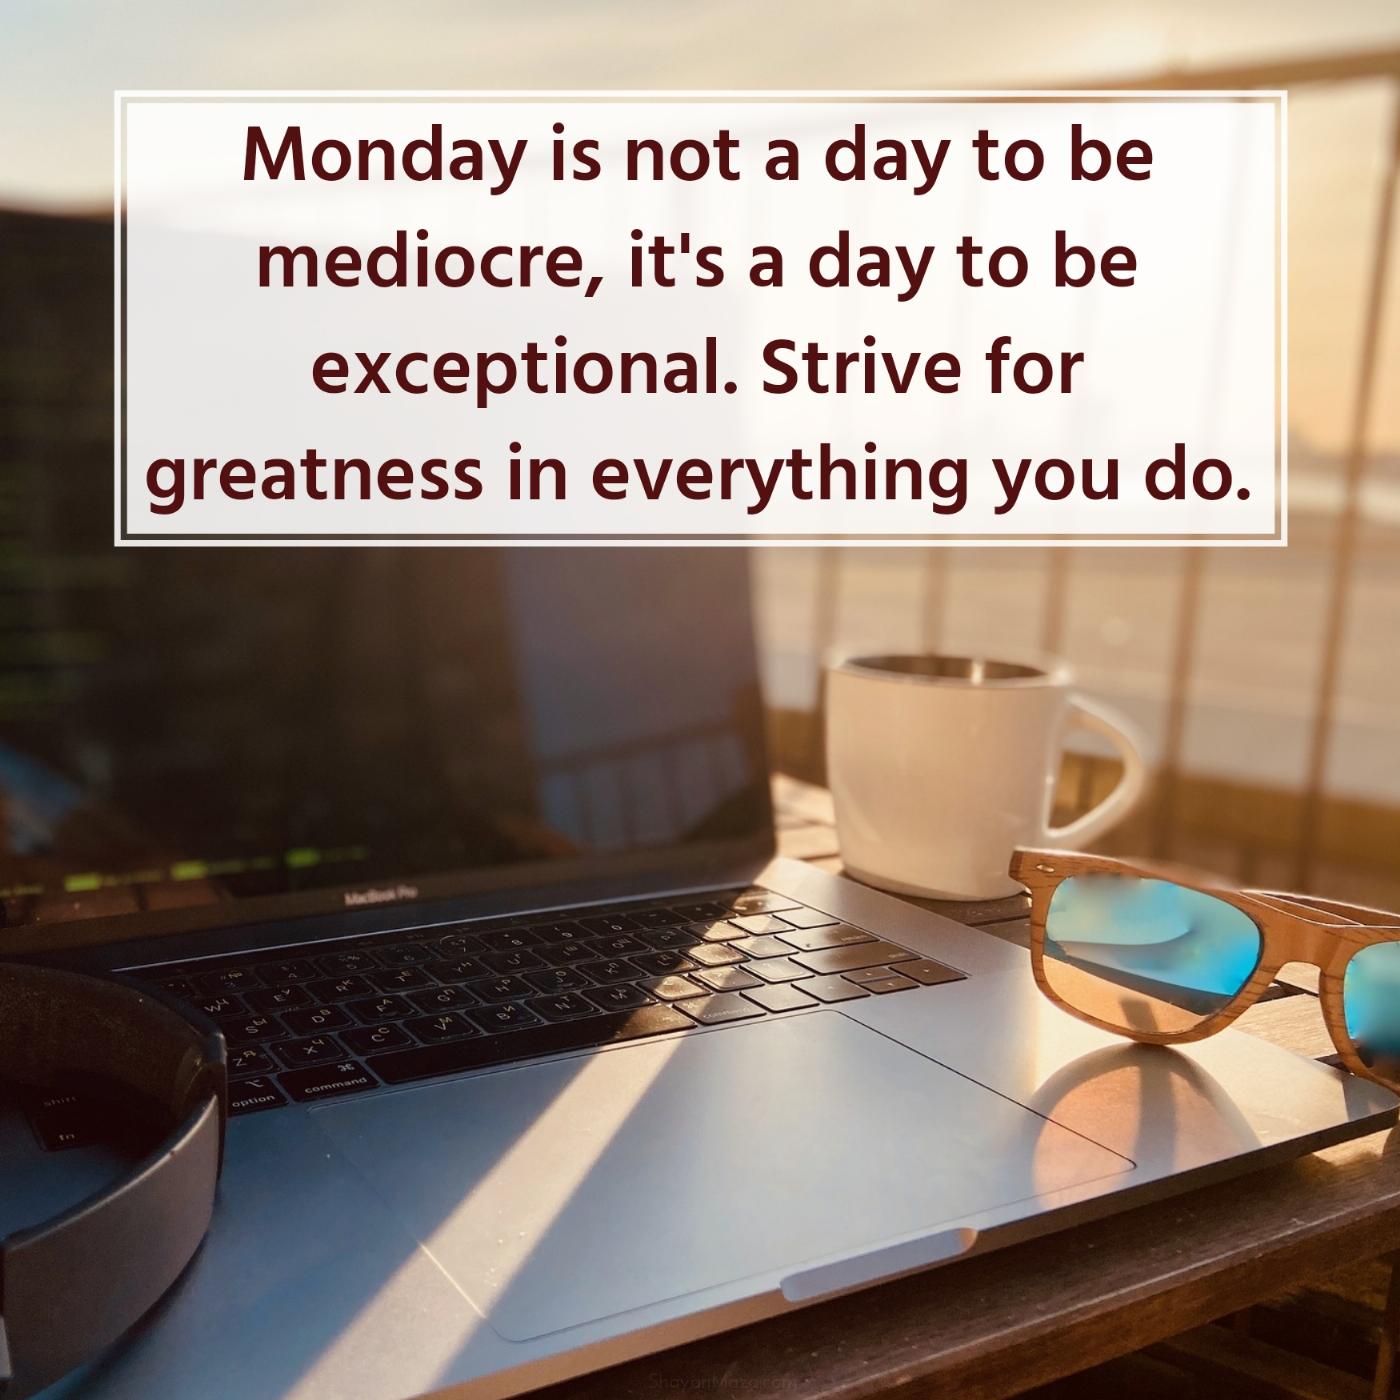 Monday is not a day to be mediocre